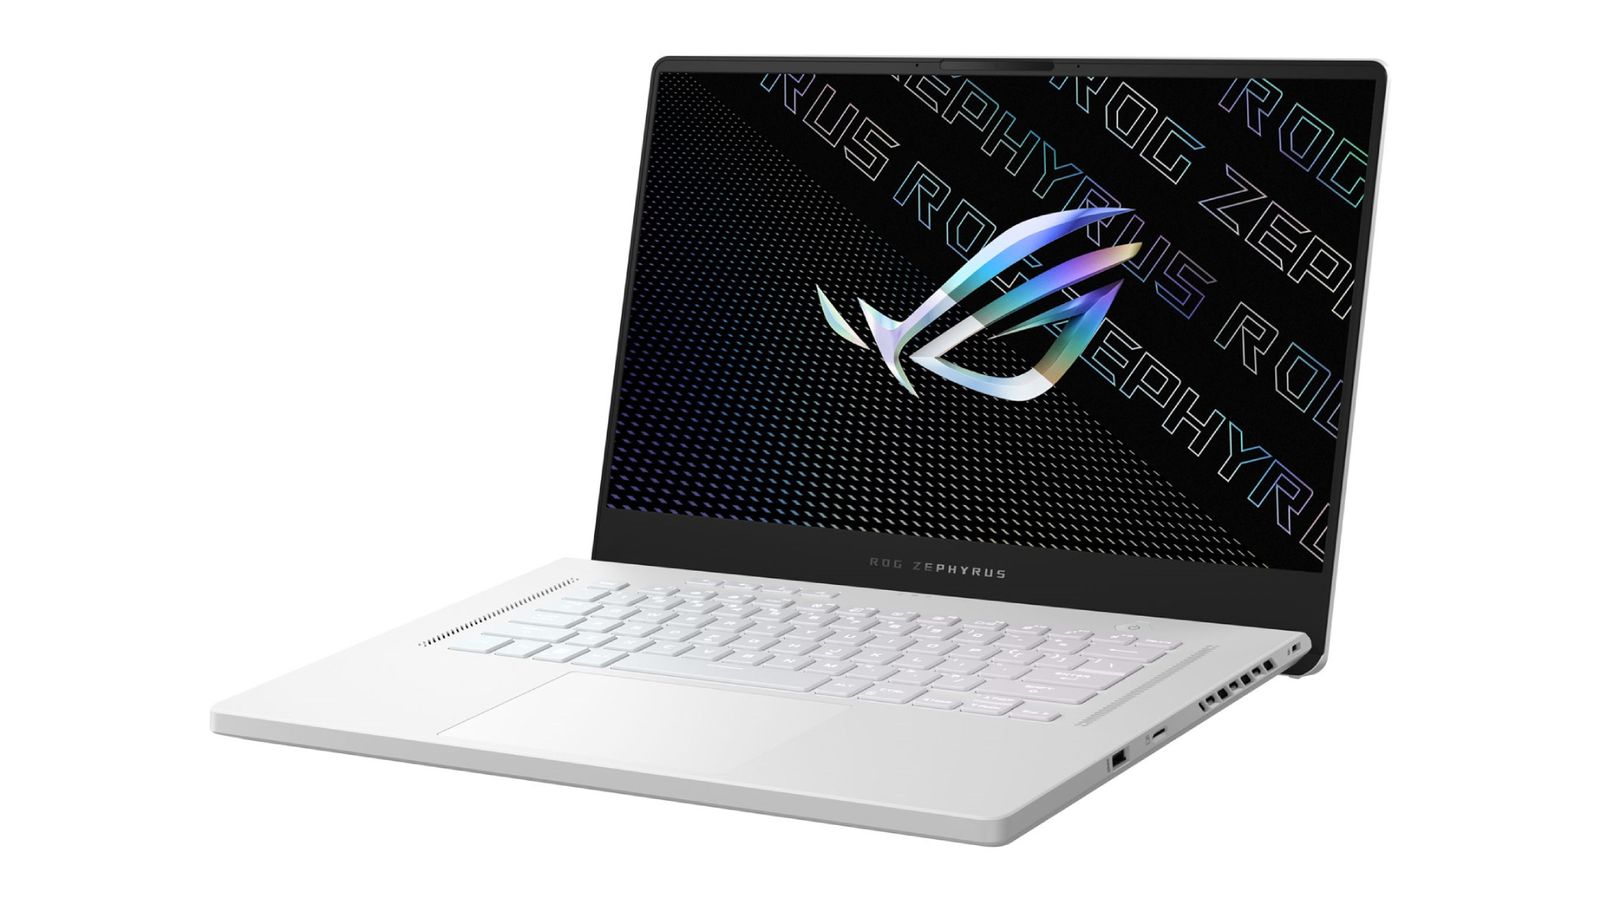 ASUS ROG ZEPHYRUS G15 product image of a white and black laptop with ASUS ROG branding on the display.